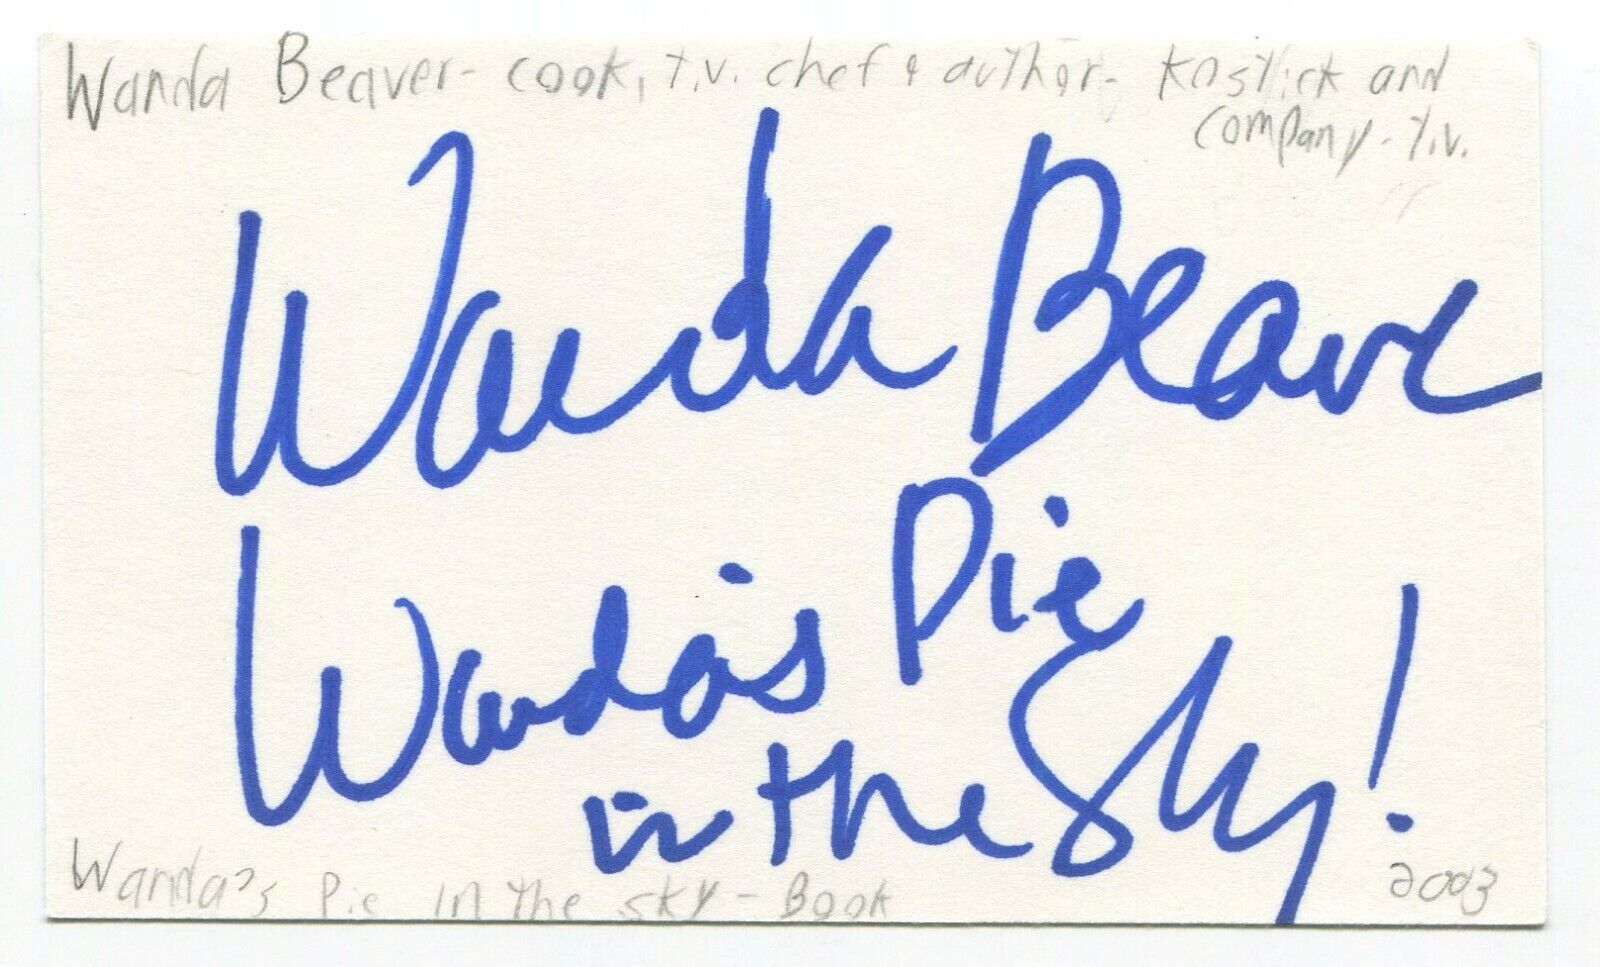 Wanda Beaver Signed 3x5 Index Card Autographed Canadian Chef Cooking 